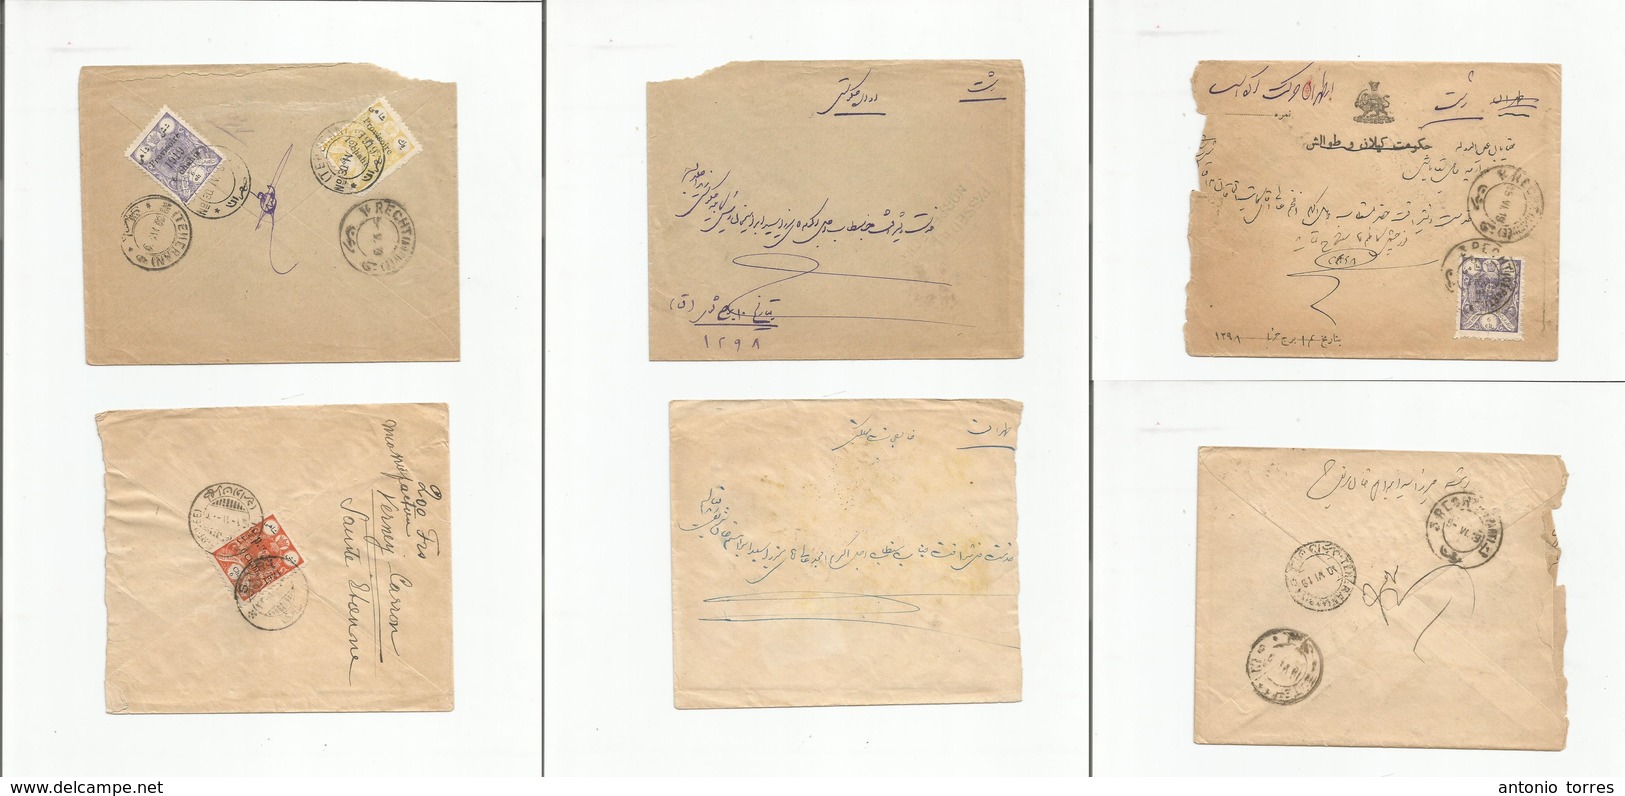 Persia. 1919. Provisorie Ovptd Issue. 3 Local Fkd Envelopes Diff Stamps + Rates. VF. - Iran